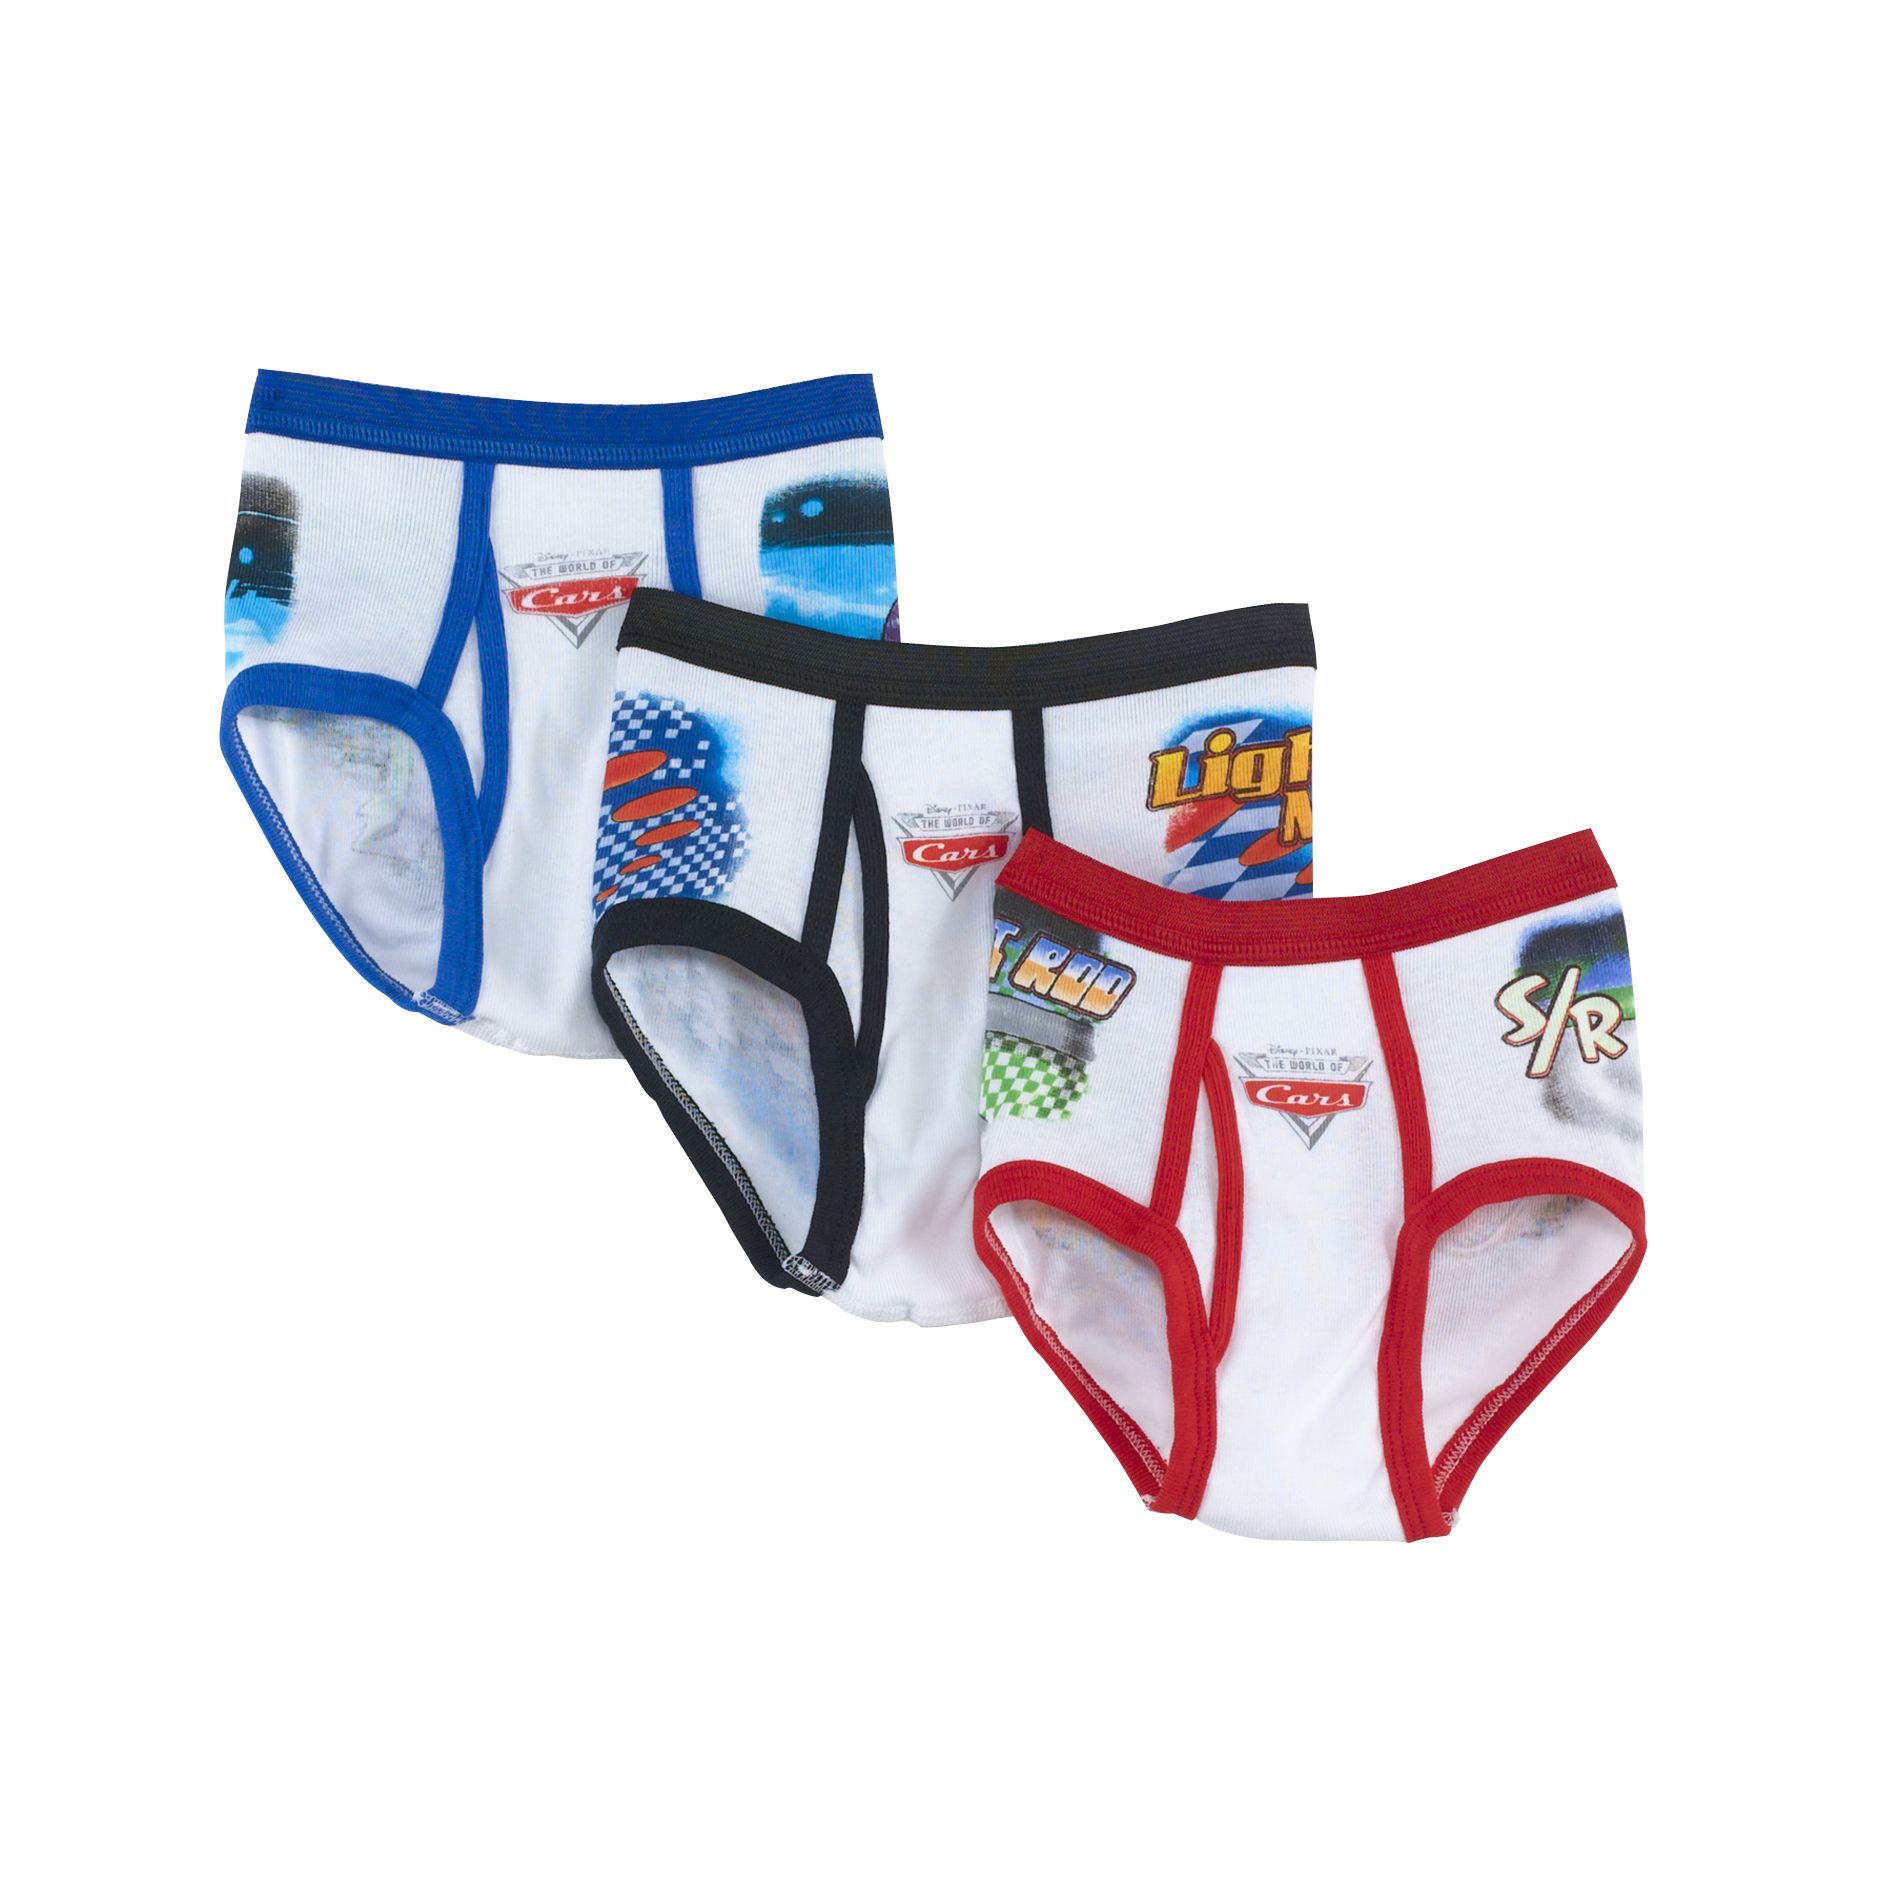 Fruit of the Loom Cars Funpals Boy's Underwear 3 Pack